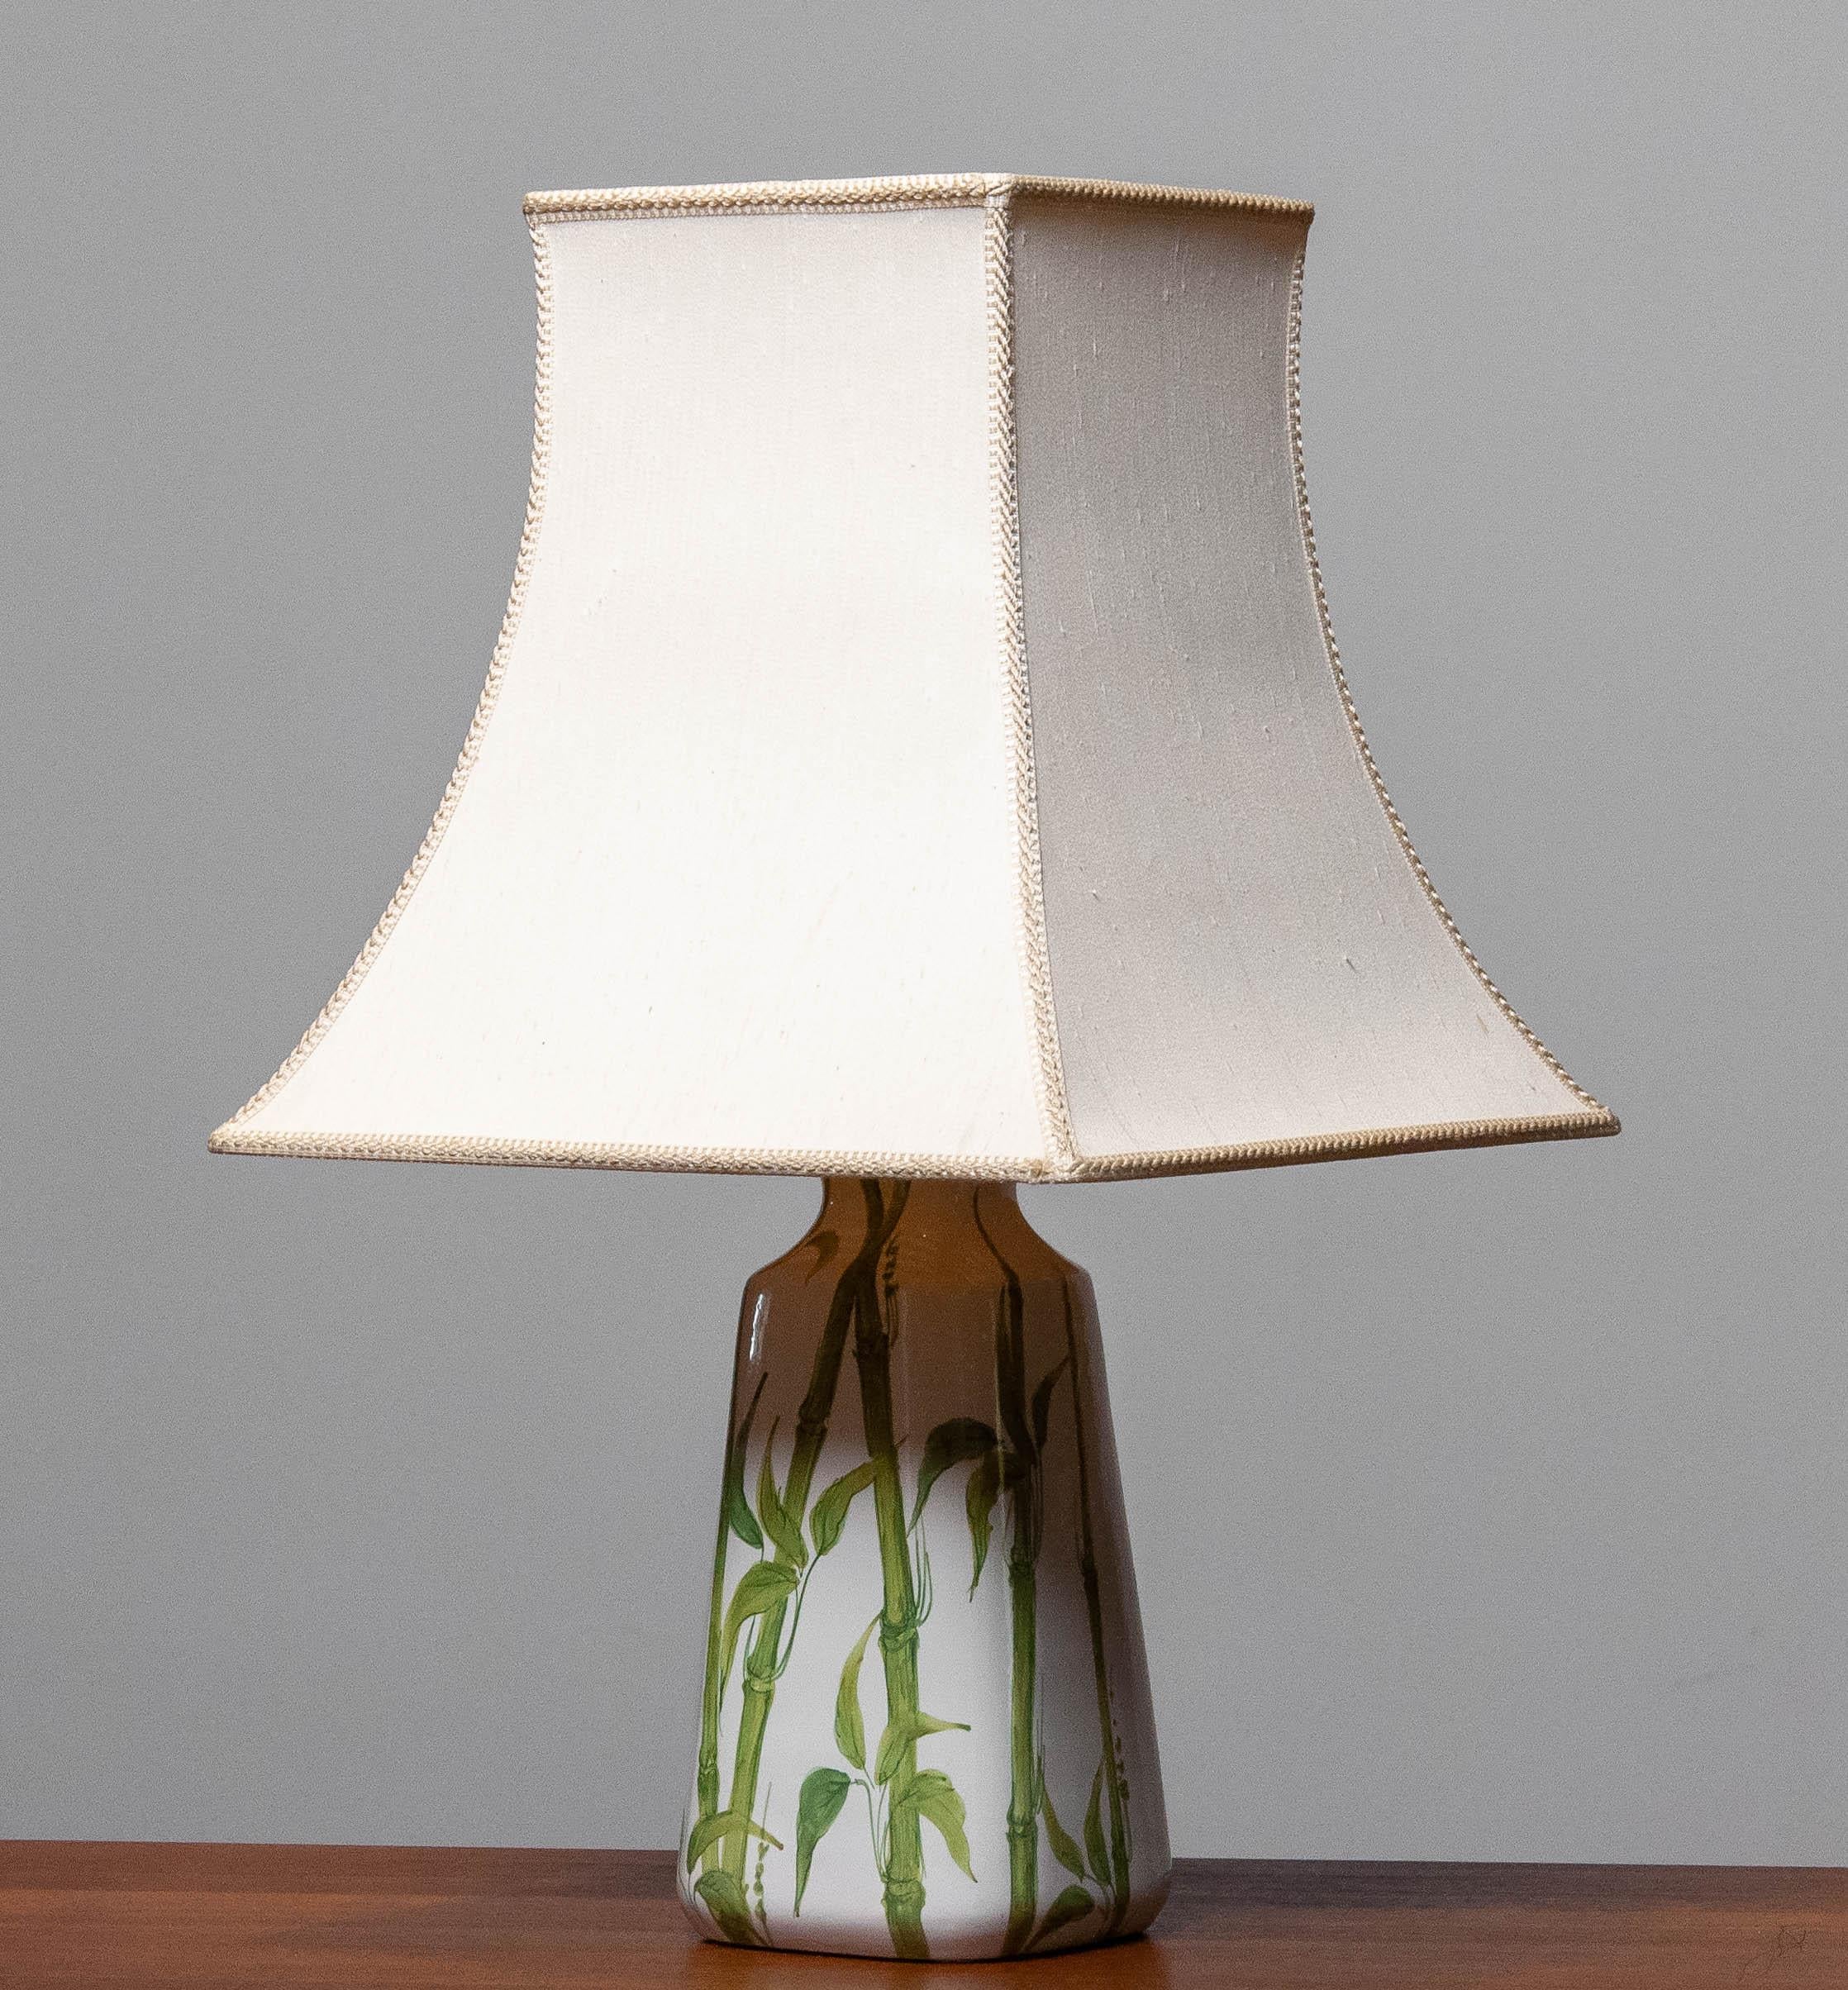 Mid-Century Modern 1960s Italian Hand Painted White Ceramic and Glazed Table Lamp with Bamboo Decor For Sale